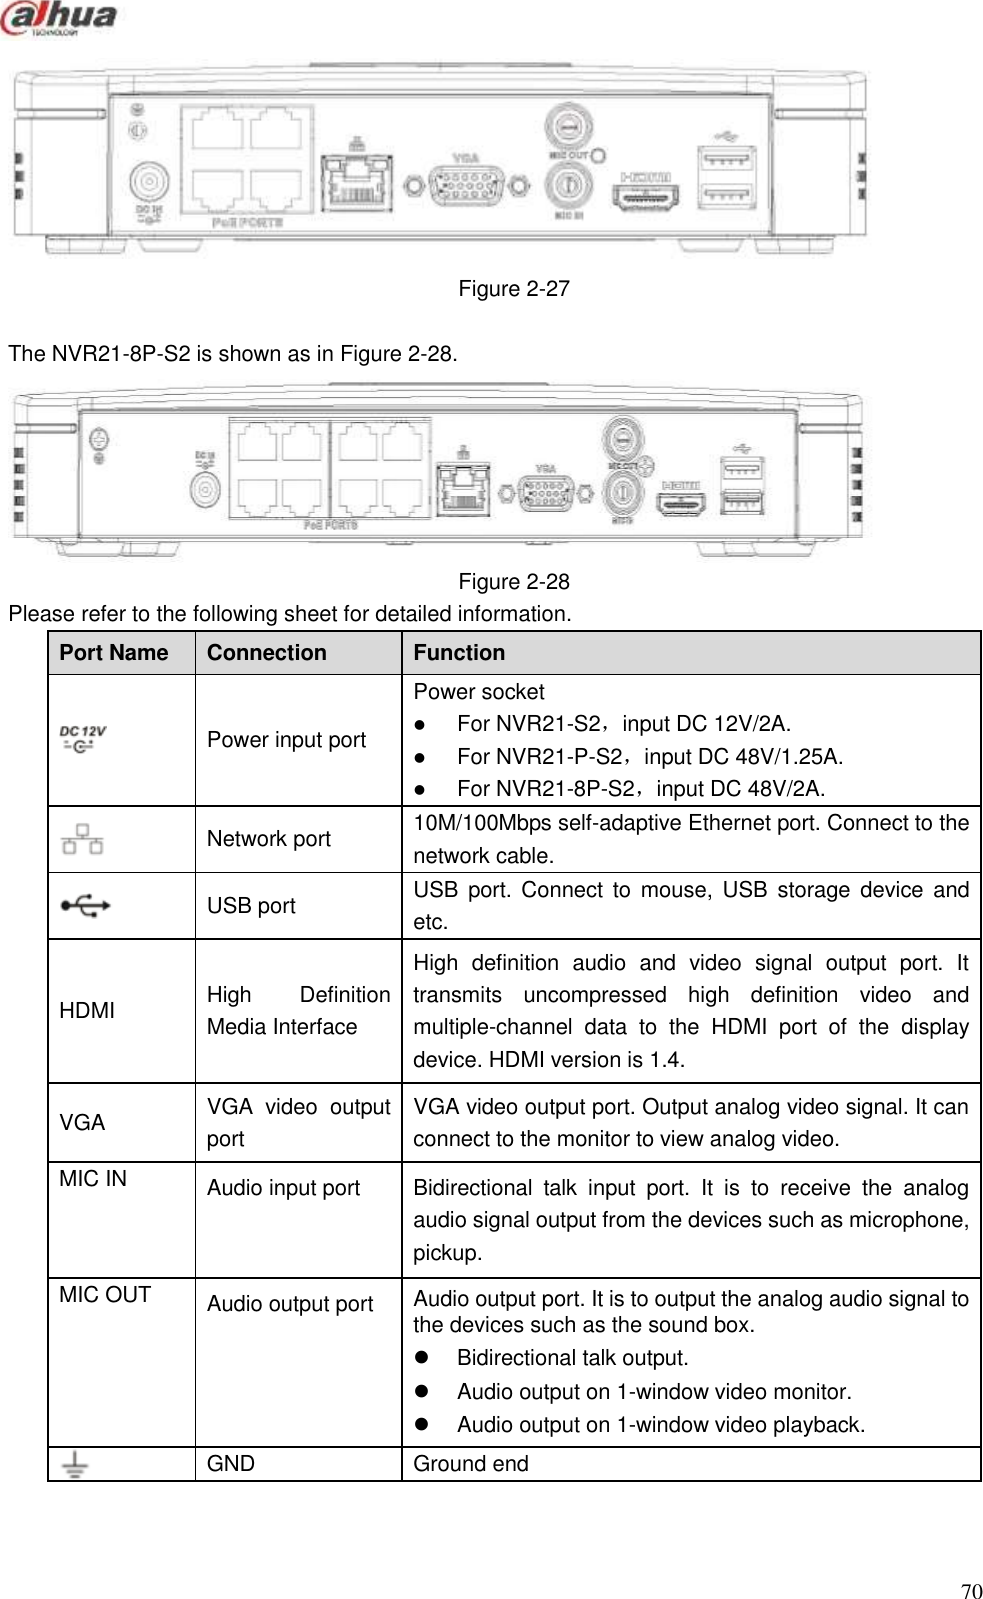  70   Figure 2-27    The NVR21-8P-S2 is shown as in Figure 2-28.  Figure 2-28 Please refer to the following sheet for detailed information.   Port Name   Connection   Function    Power input port Power socket    For NVR21-S2，input DC 12V/2A.  For NVR21-P-S2，input DC 48V/1.25A.  For NVR21-8P-S2，input DC 48V/2A.  Network port 10M/100Mbps self-adaptive Ethernet port. Connect to the network cable.  USB port USB  port. Connect  to  mouse, USB  storage device  and etc. HDMI High  Definition Media Interface High  definition  audio  and  video  signal  output  port.  It transmits  uncompressed  high  definition  video  and multiple-channel  data  to  the  HDMI  port  of  the  display device. HDMI version is 1.4. VGA VGA  video  output port VGA video output port. Output analog video signal. It can connect to the monitor to view analog video. MIC IN Audio input port Bidirectional  talk  input  port.  It  is  to  receive  the  analog audio signal output from the devices such as microphone, pickup. MIC OUT Audio output port Audio output port. It is to output the analog audio signal to the devices such as the sound box.     Bidirectional talk output.     Audio output on 1-window video monitor.     Audio output on 1-window video playback.  GND Ground end   